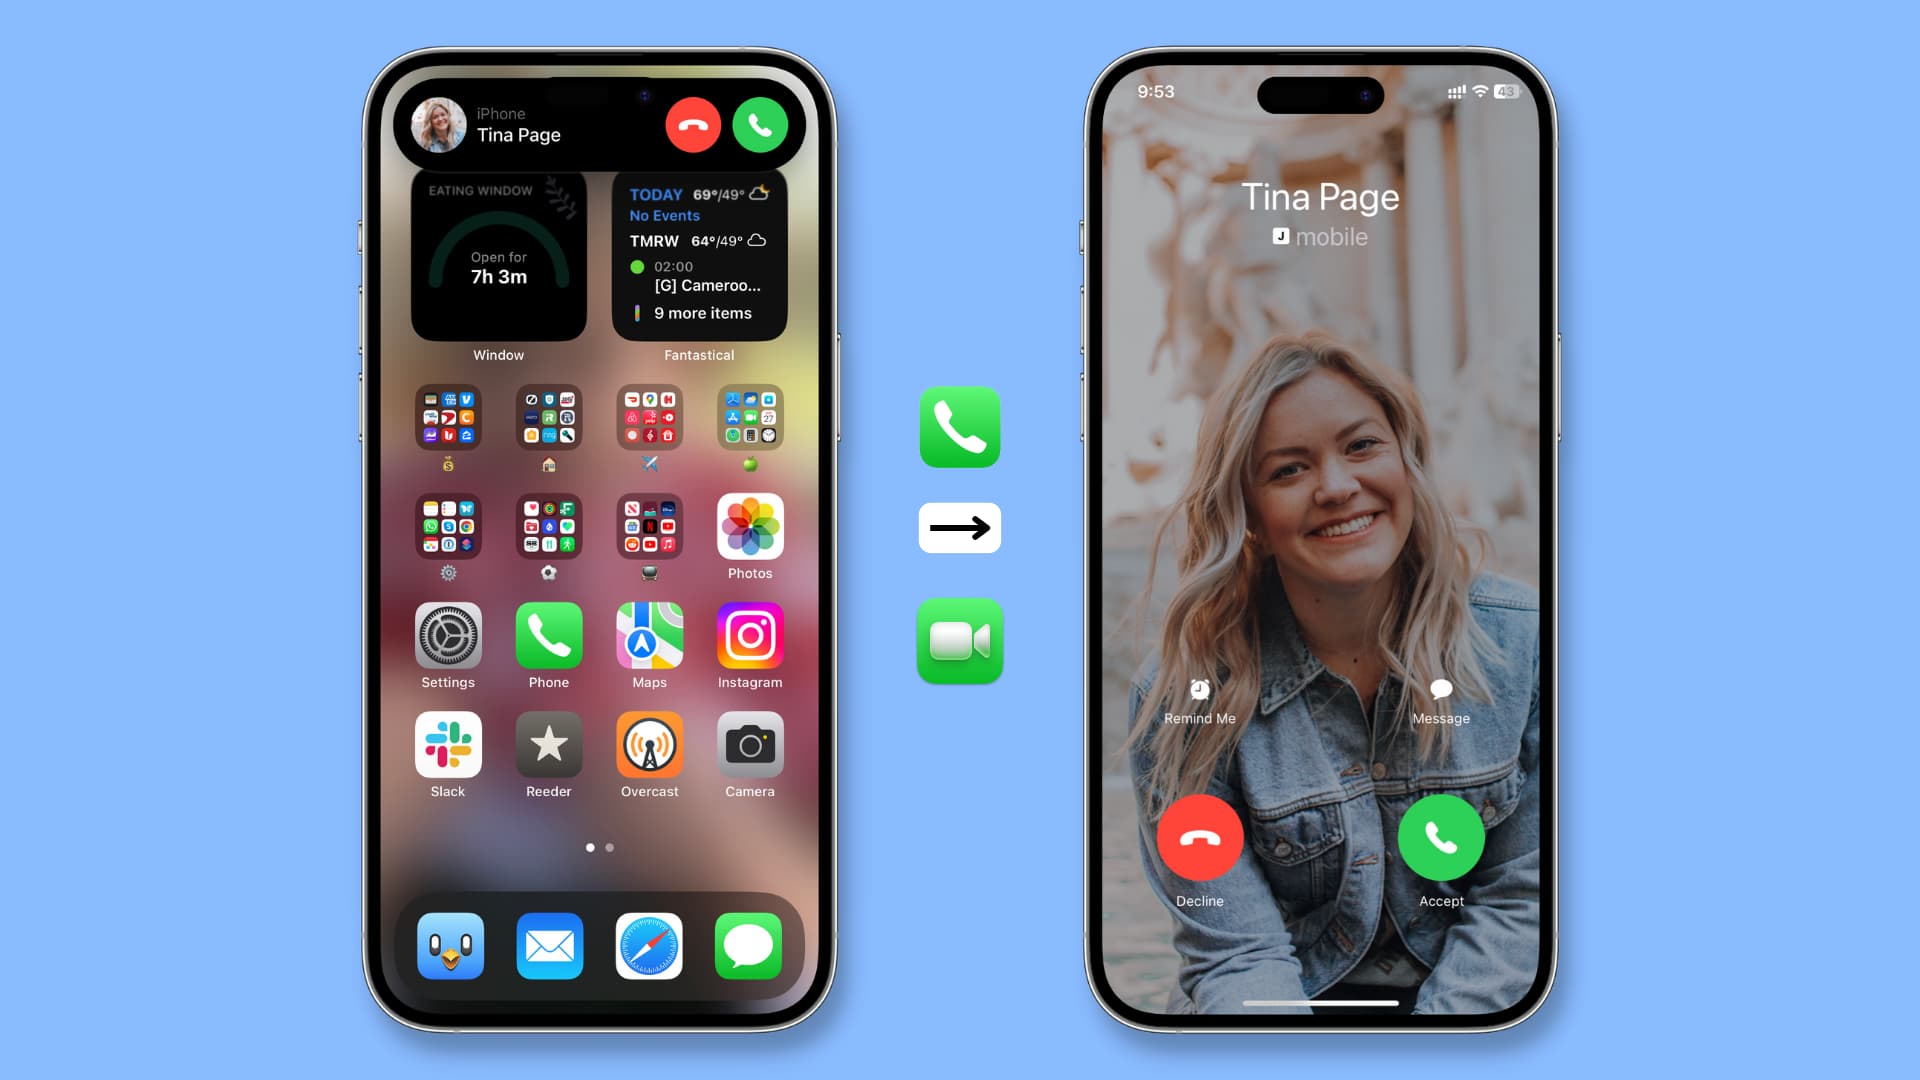 How to show the full screen call interface on your iPhone